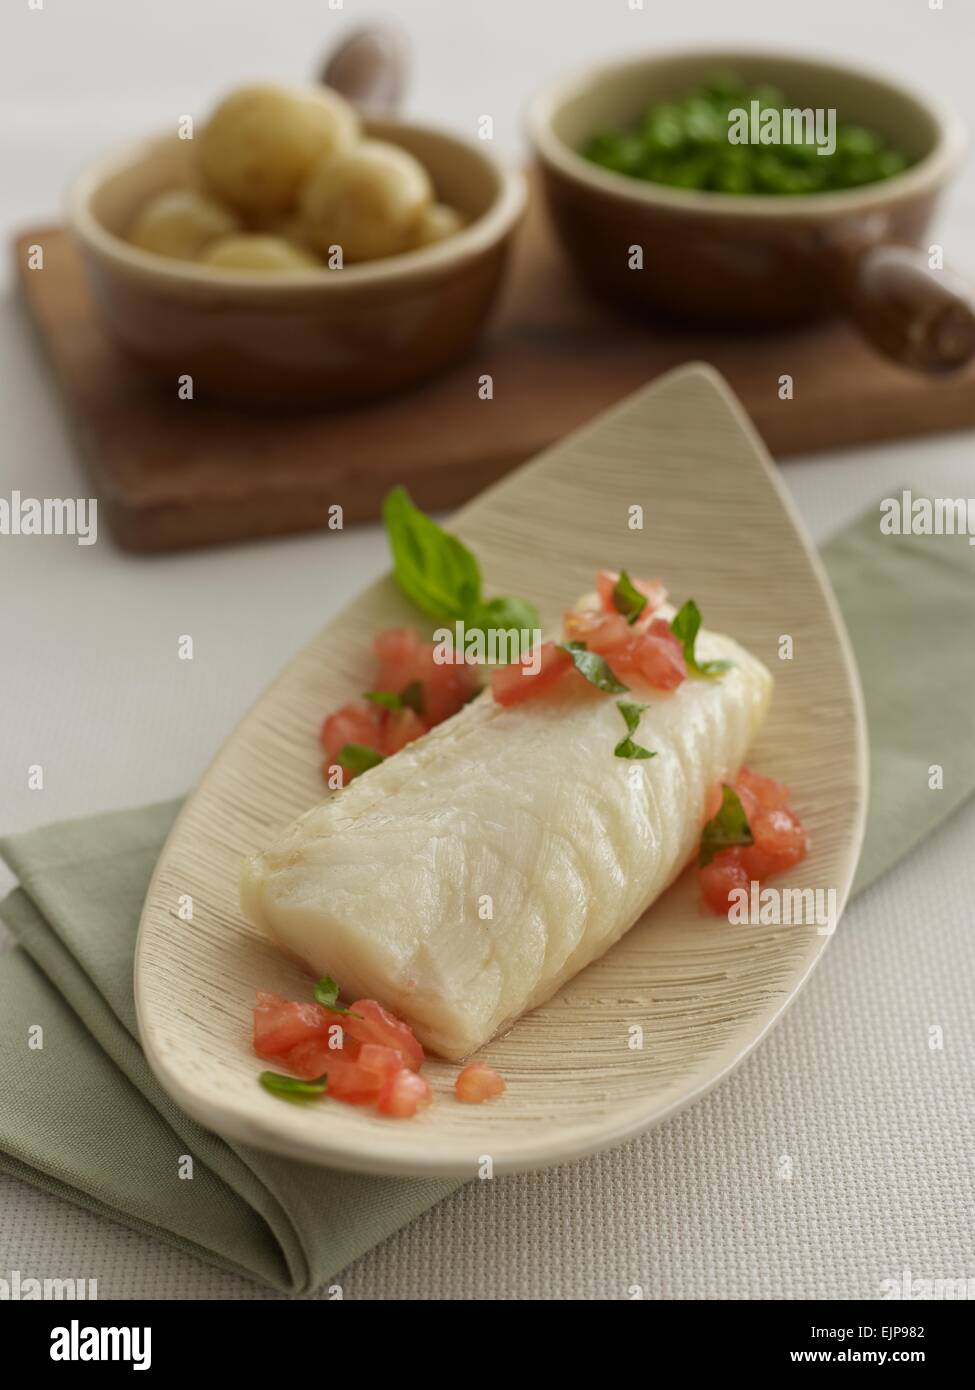 Simple plated meal of pan fried plain fillet of haddock or cod fish with chopped tomato and basil boiled new potatoes Stock Photo